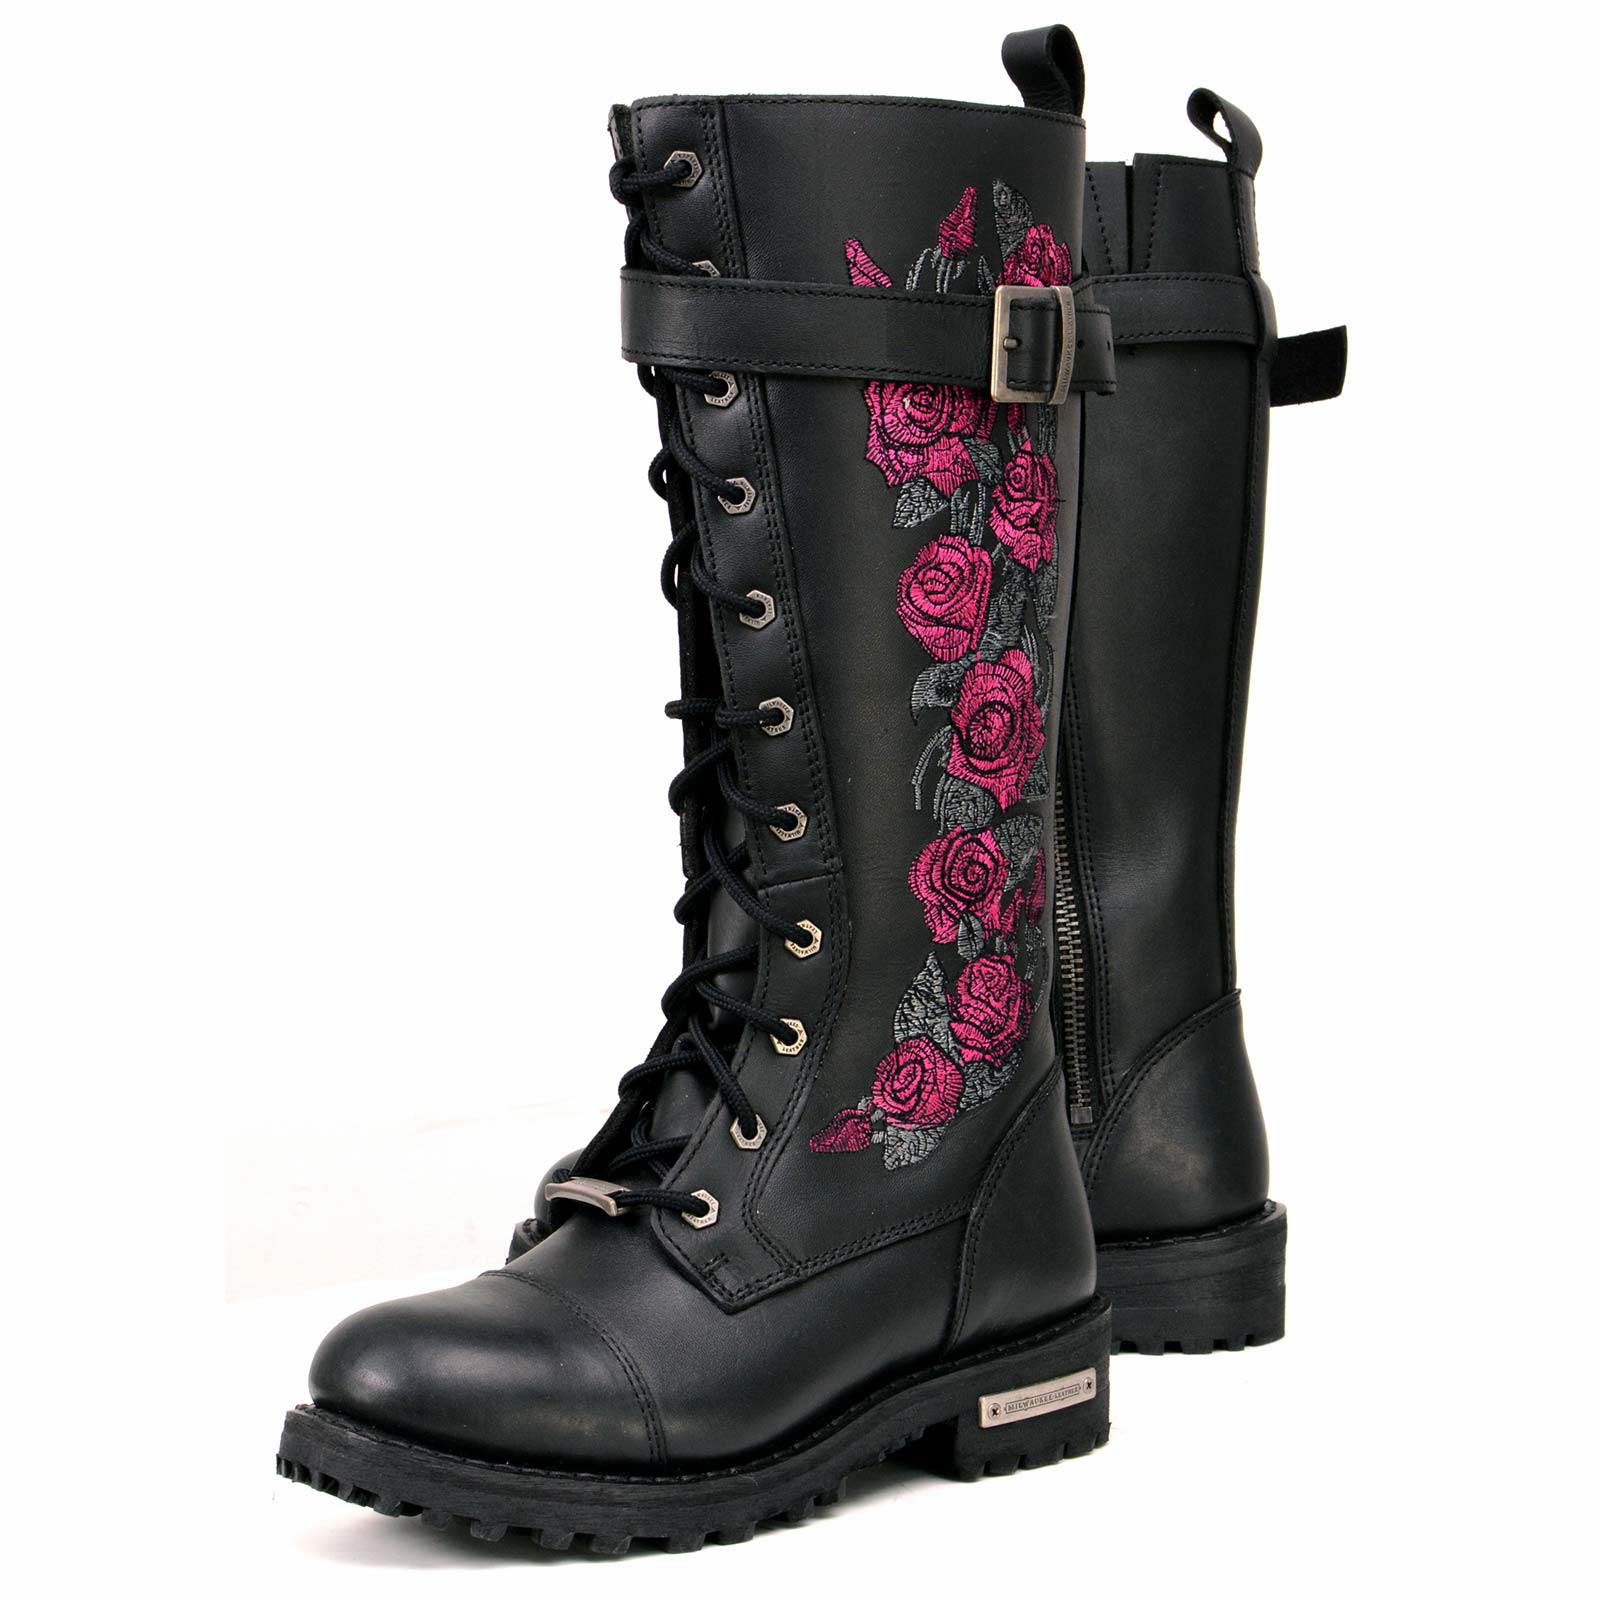 Milwaukee Leather MBL9356 Women's Black 14” Tall Motorcycle Boots Lace-Up High-Rise Pink Embroidered Leather Shoe